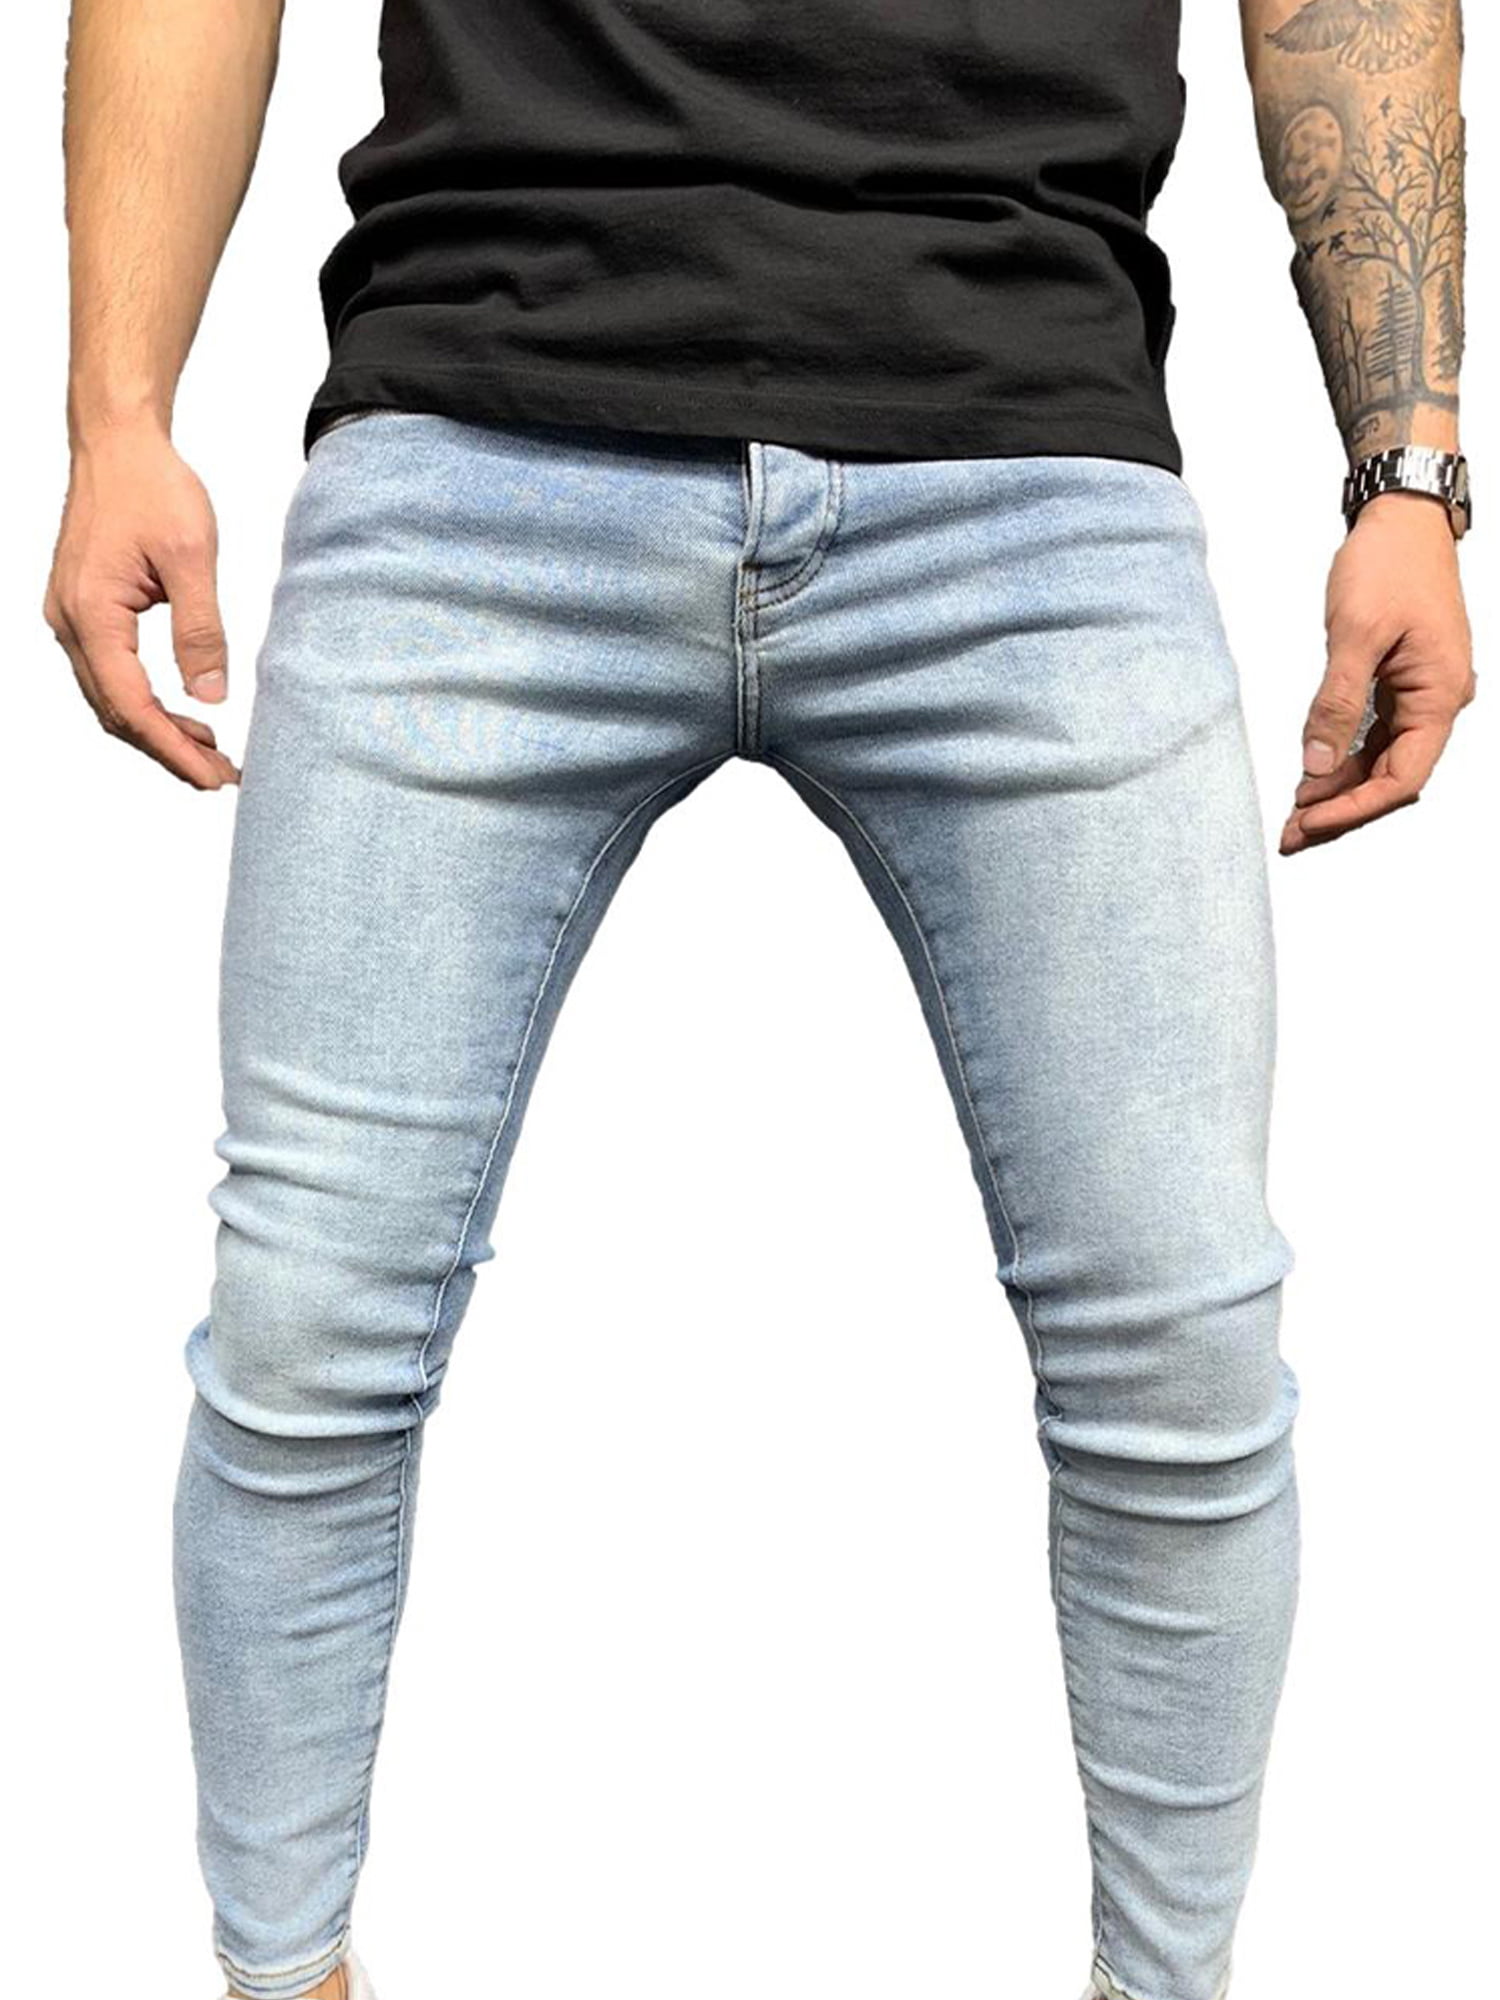 Men's Stretchy Slim Fit Denim Pants Casual Long Straight Trousers Skinny Jeans 